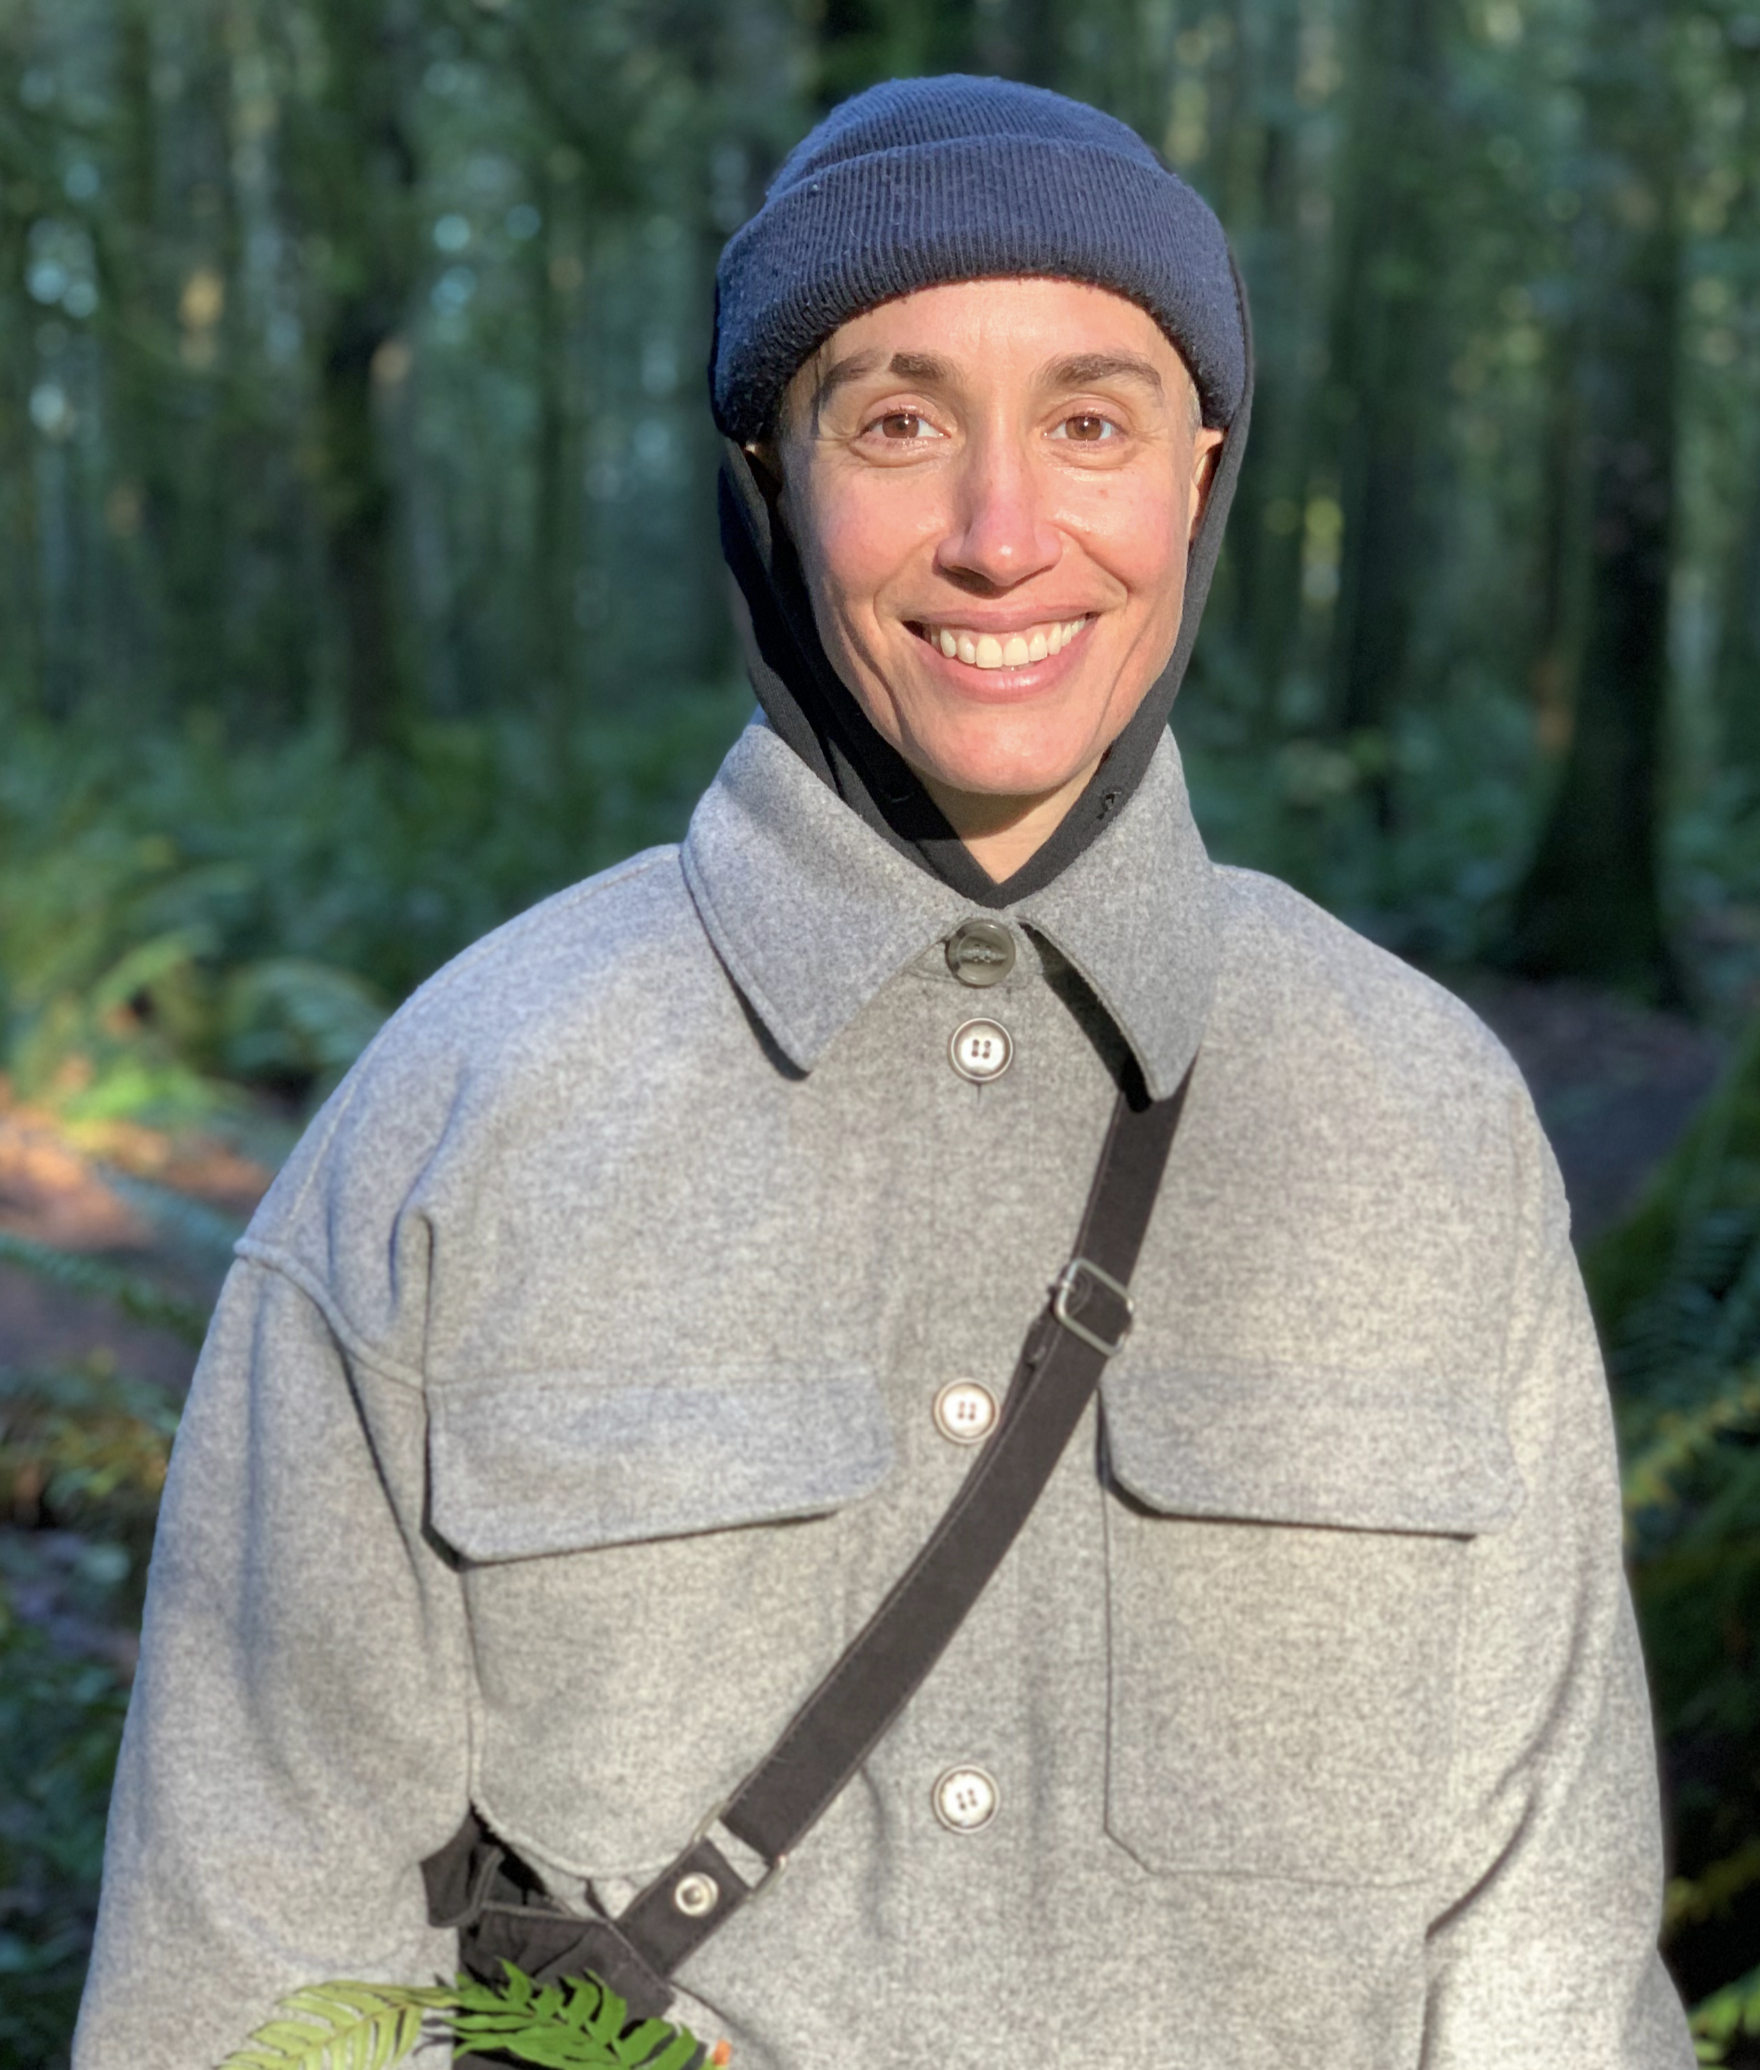 Person with gray button up long sleeve coat iwith a brown sling bag over their shoulders. They are wearing a blue beanie and a wooded area is in the background.